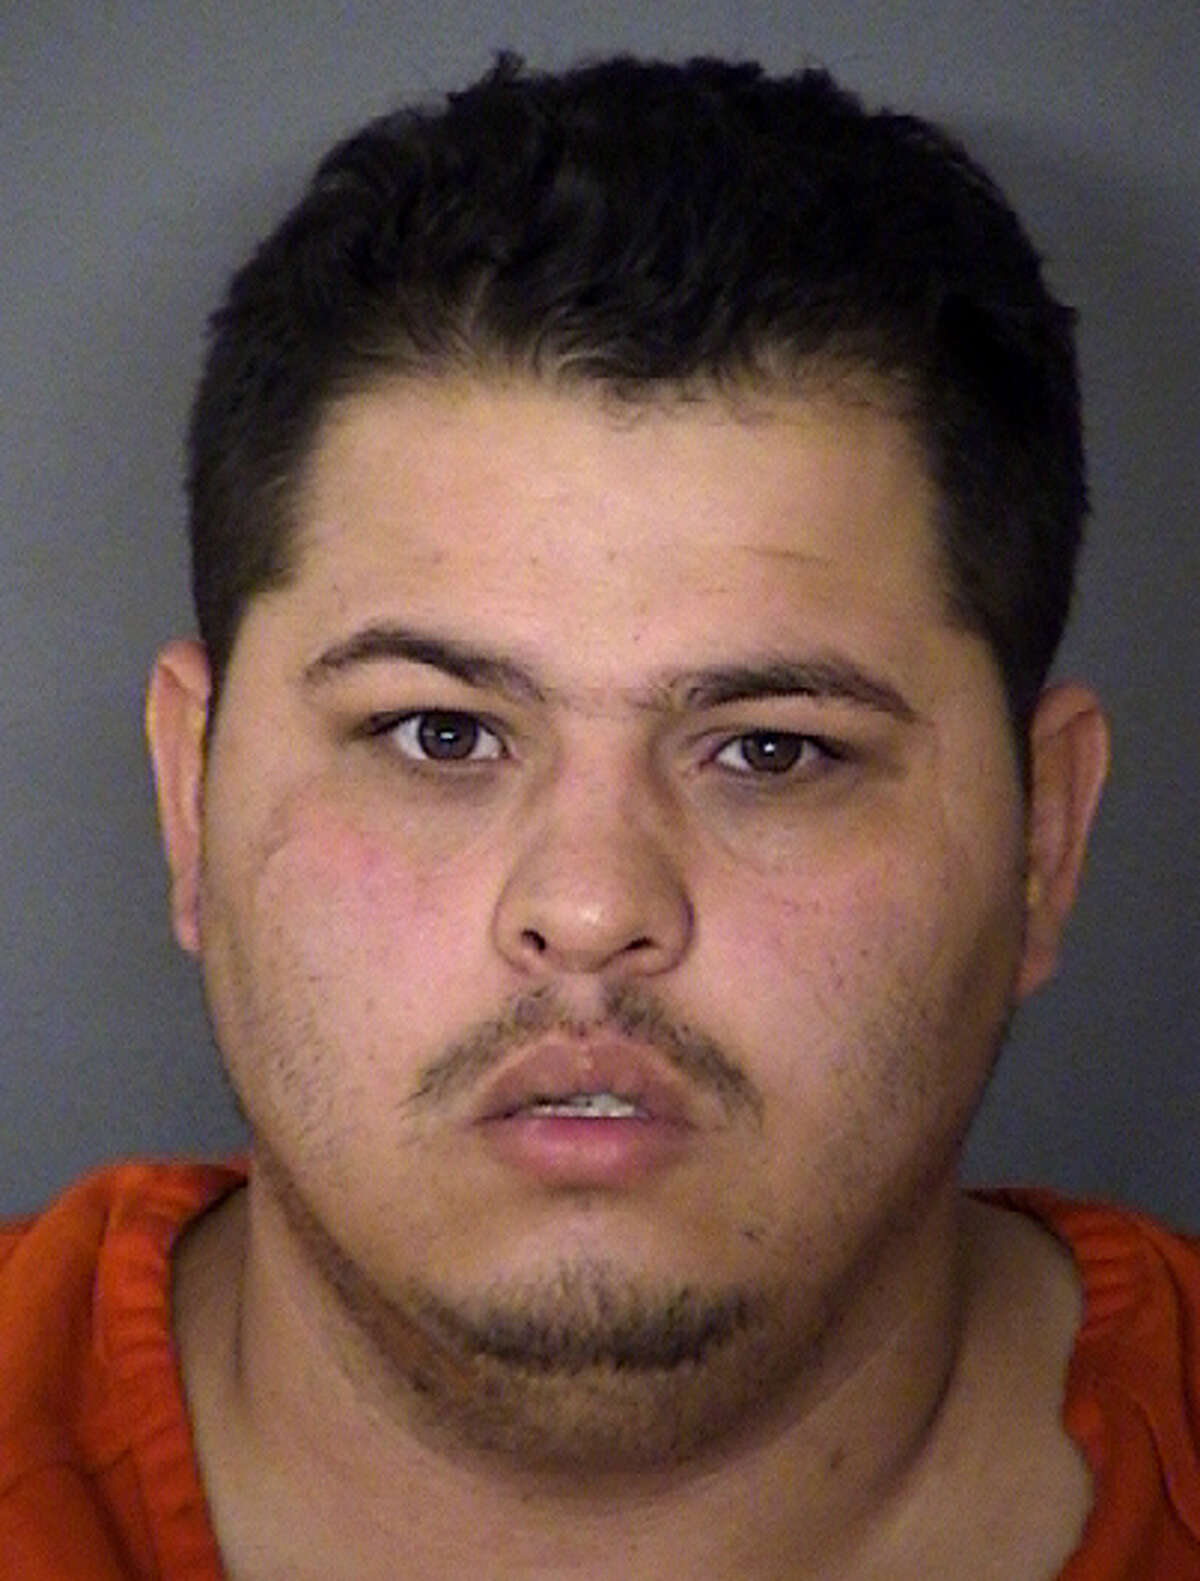 Rogelio Archuleta, arrested on three charges of causing serious bodily injury to a child.